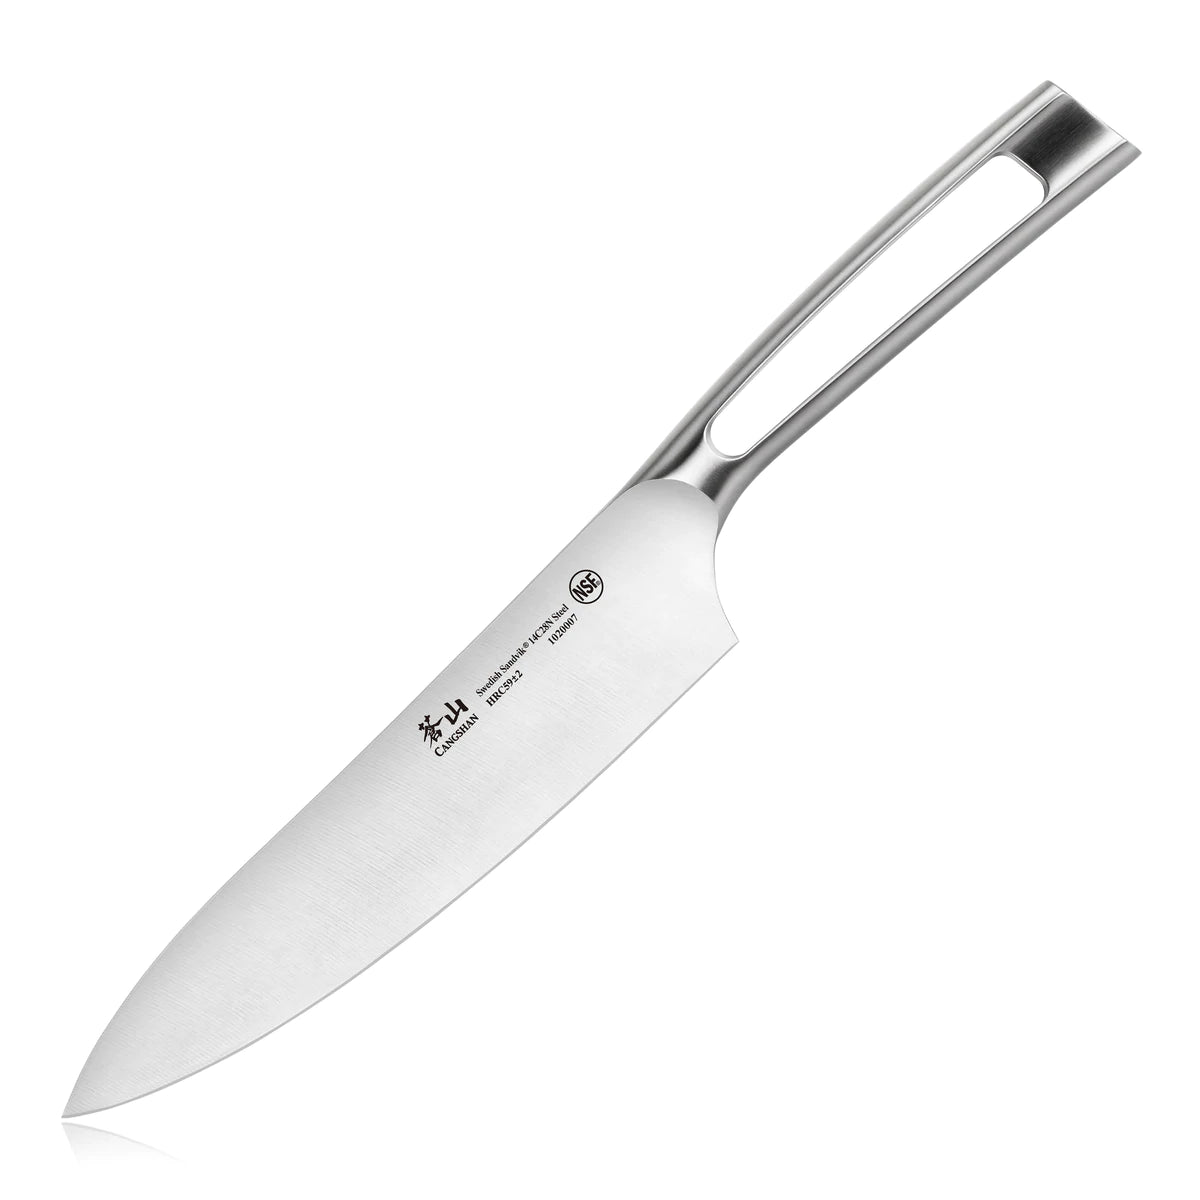 Cangshan L1 Series German Steel Forged 8 Chef's Knife, White